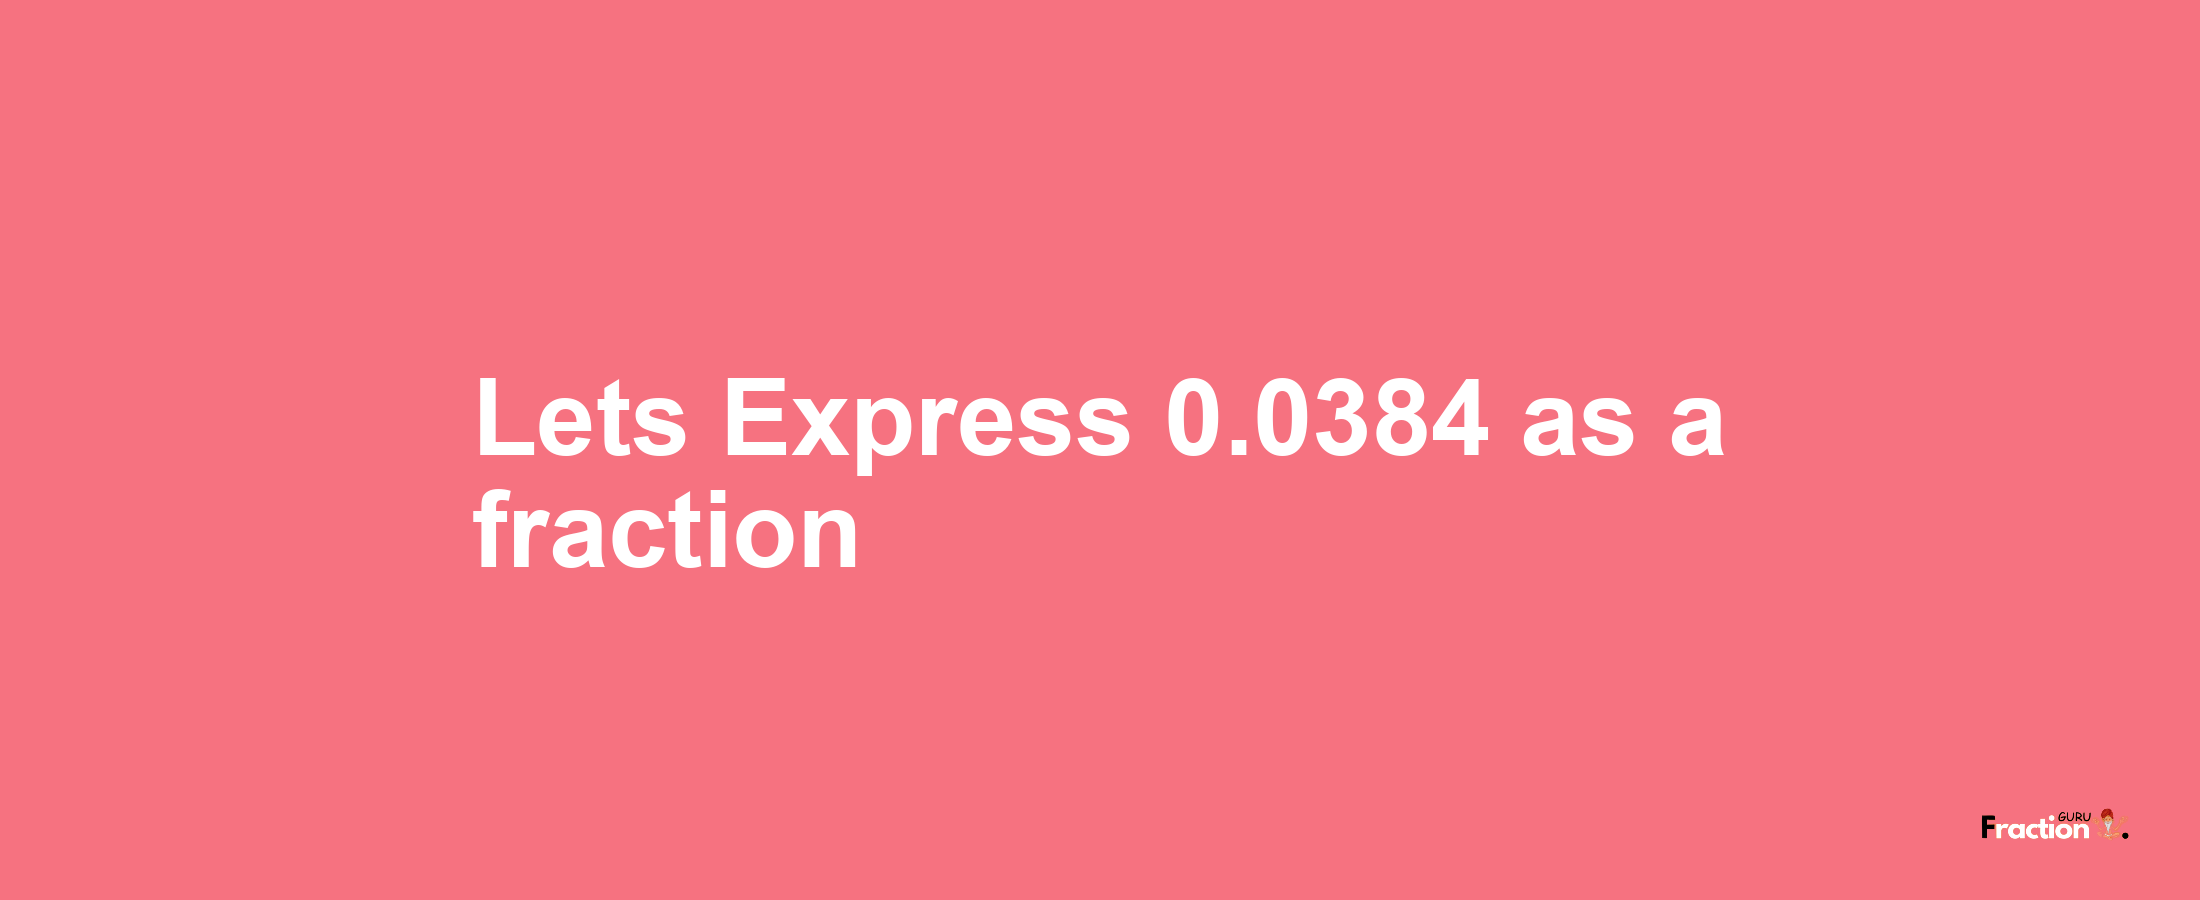 Lets Express 0.0384 as afraction